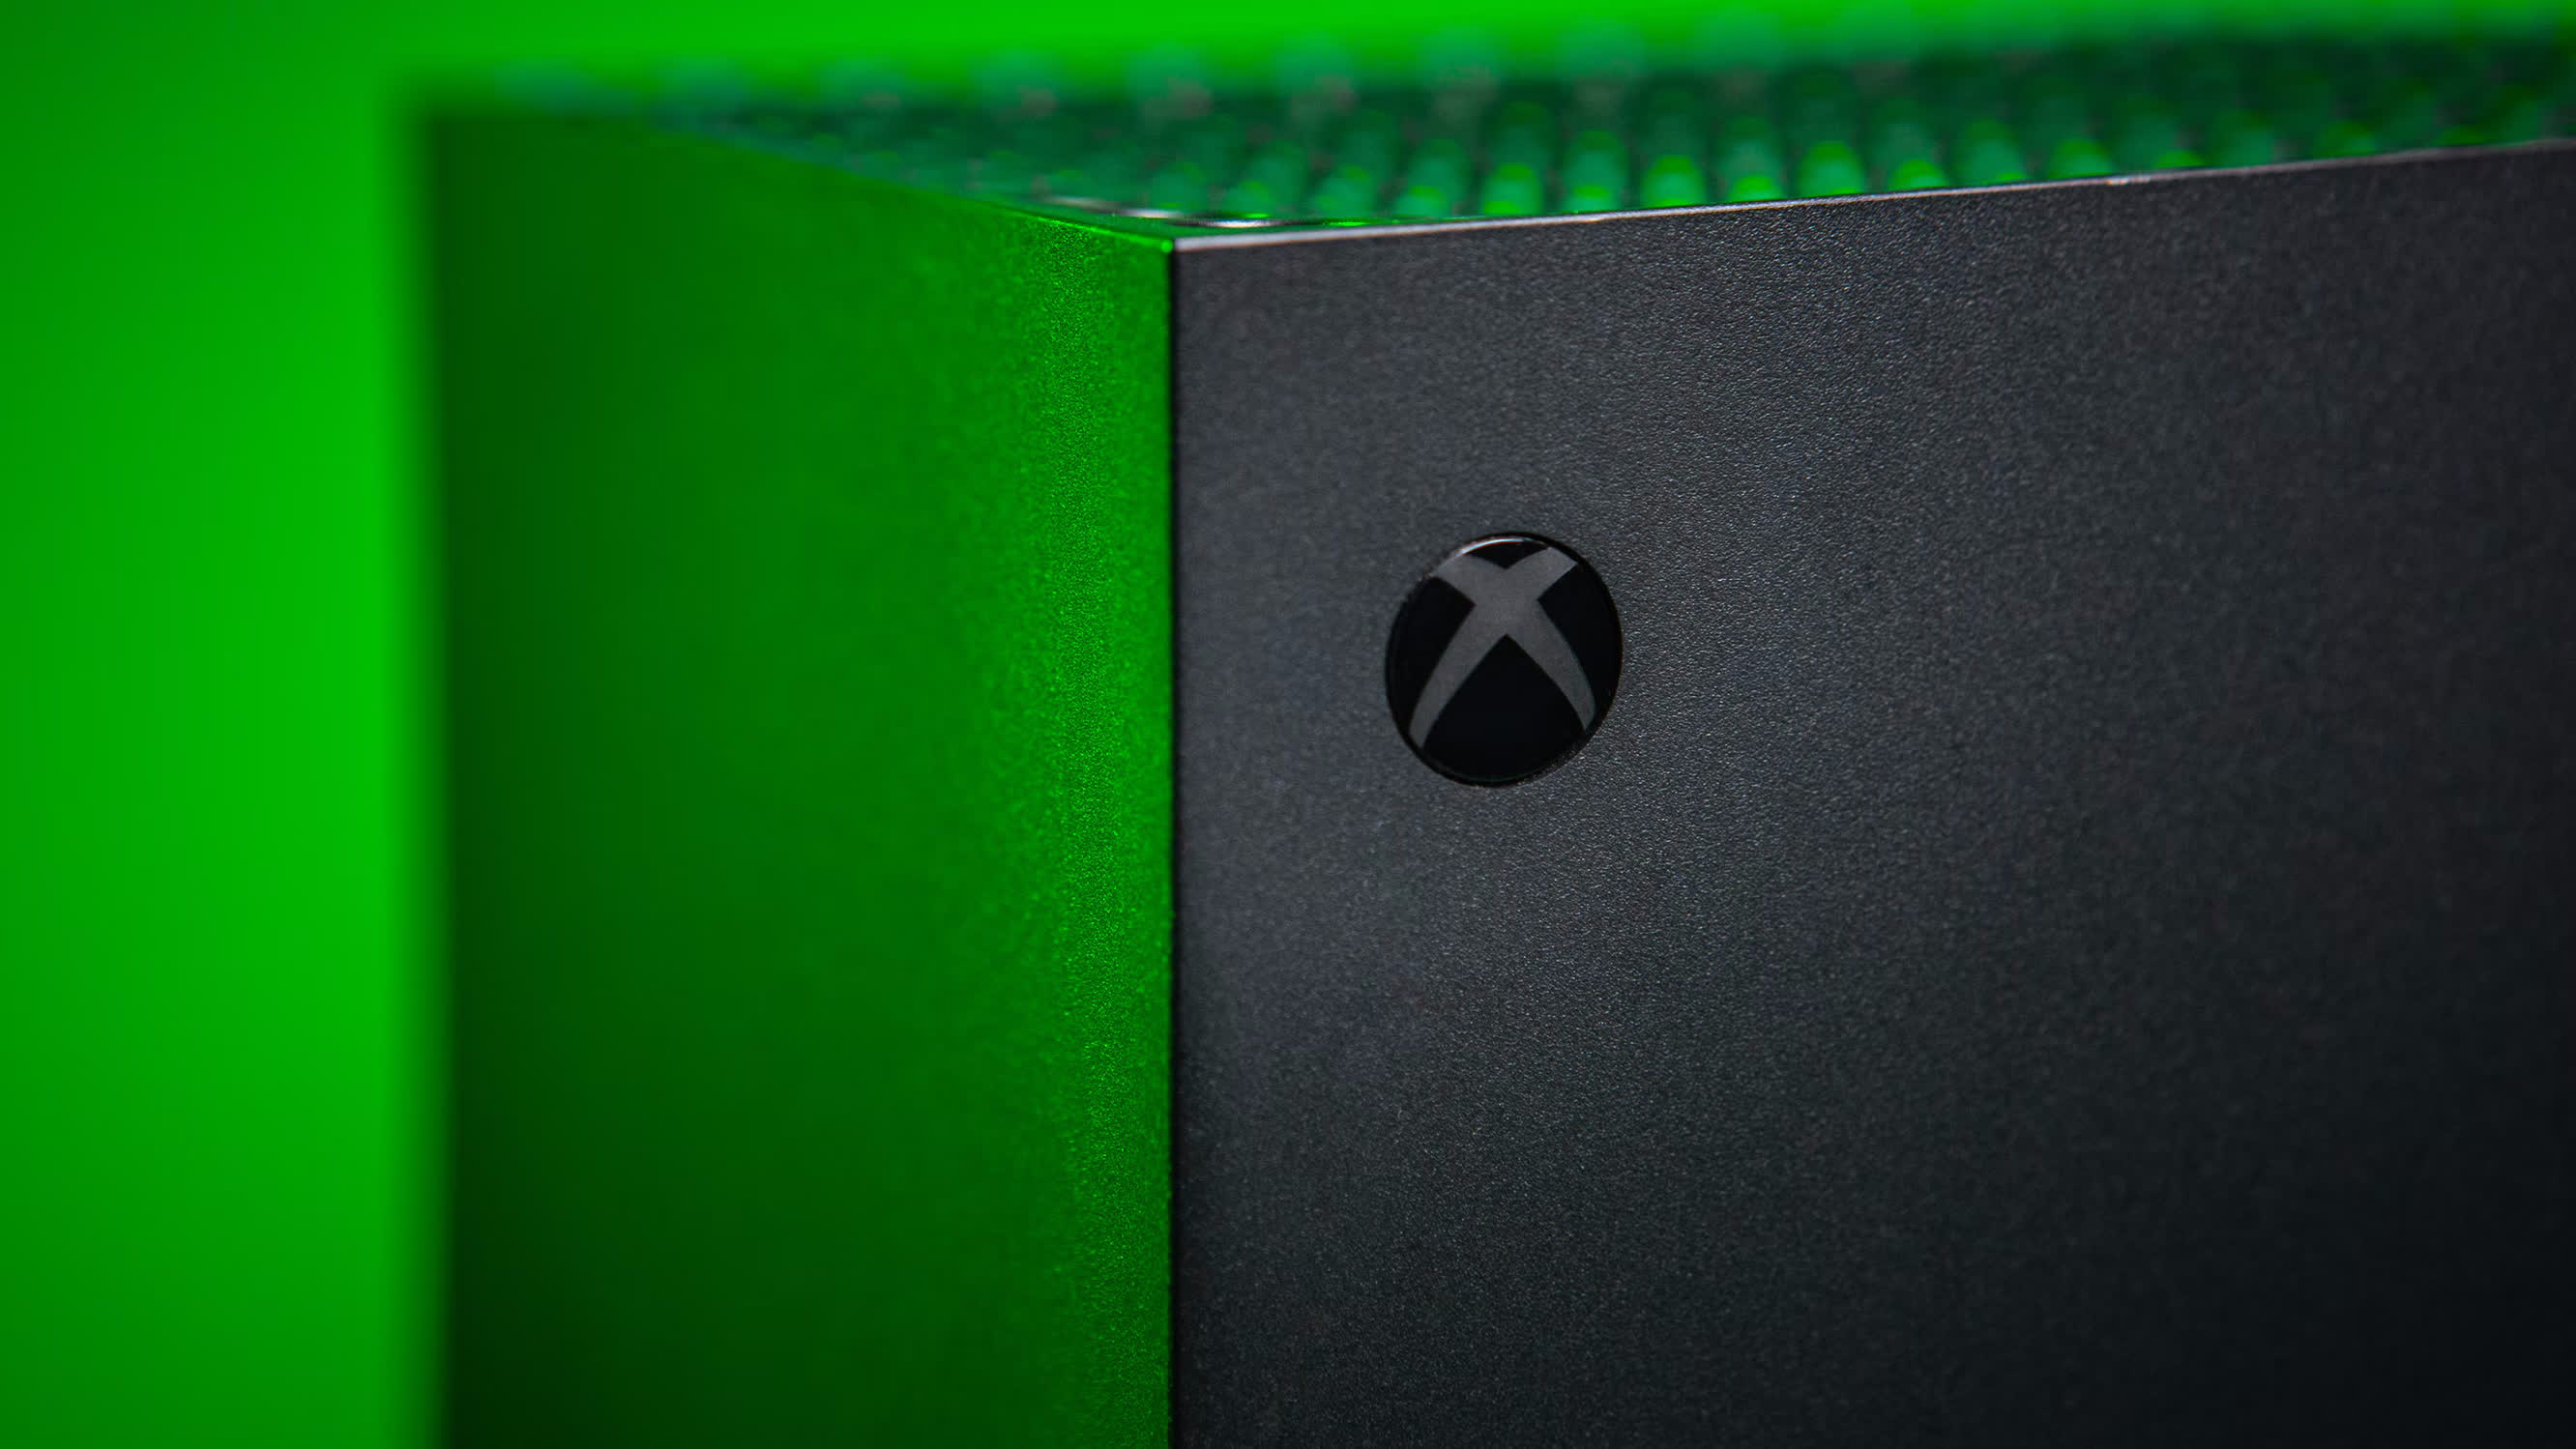 Microsoft might be working on a more efficient Xbox Series X chip